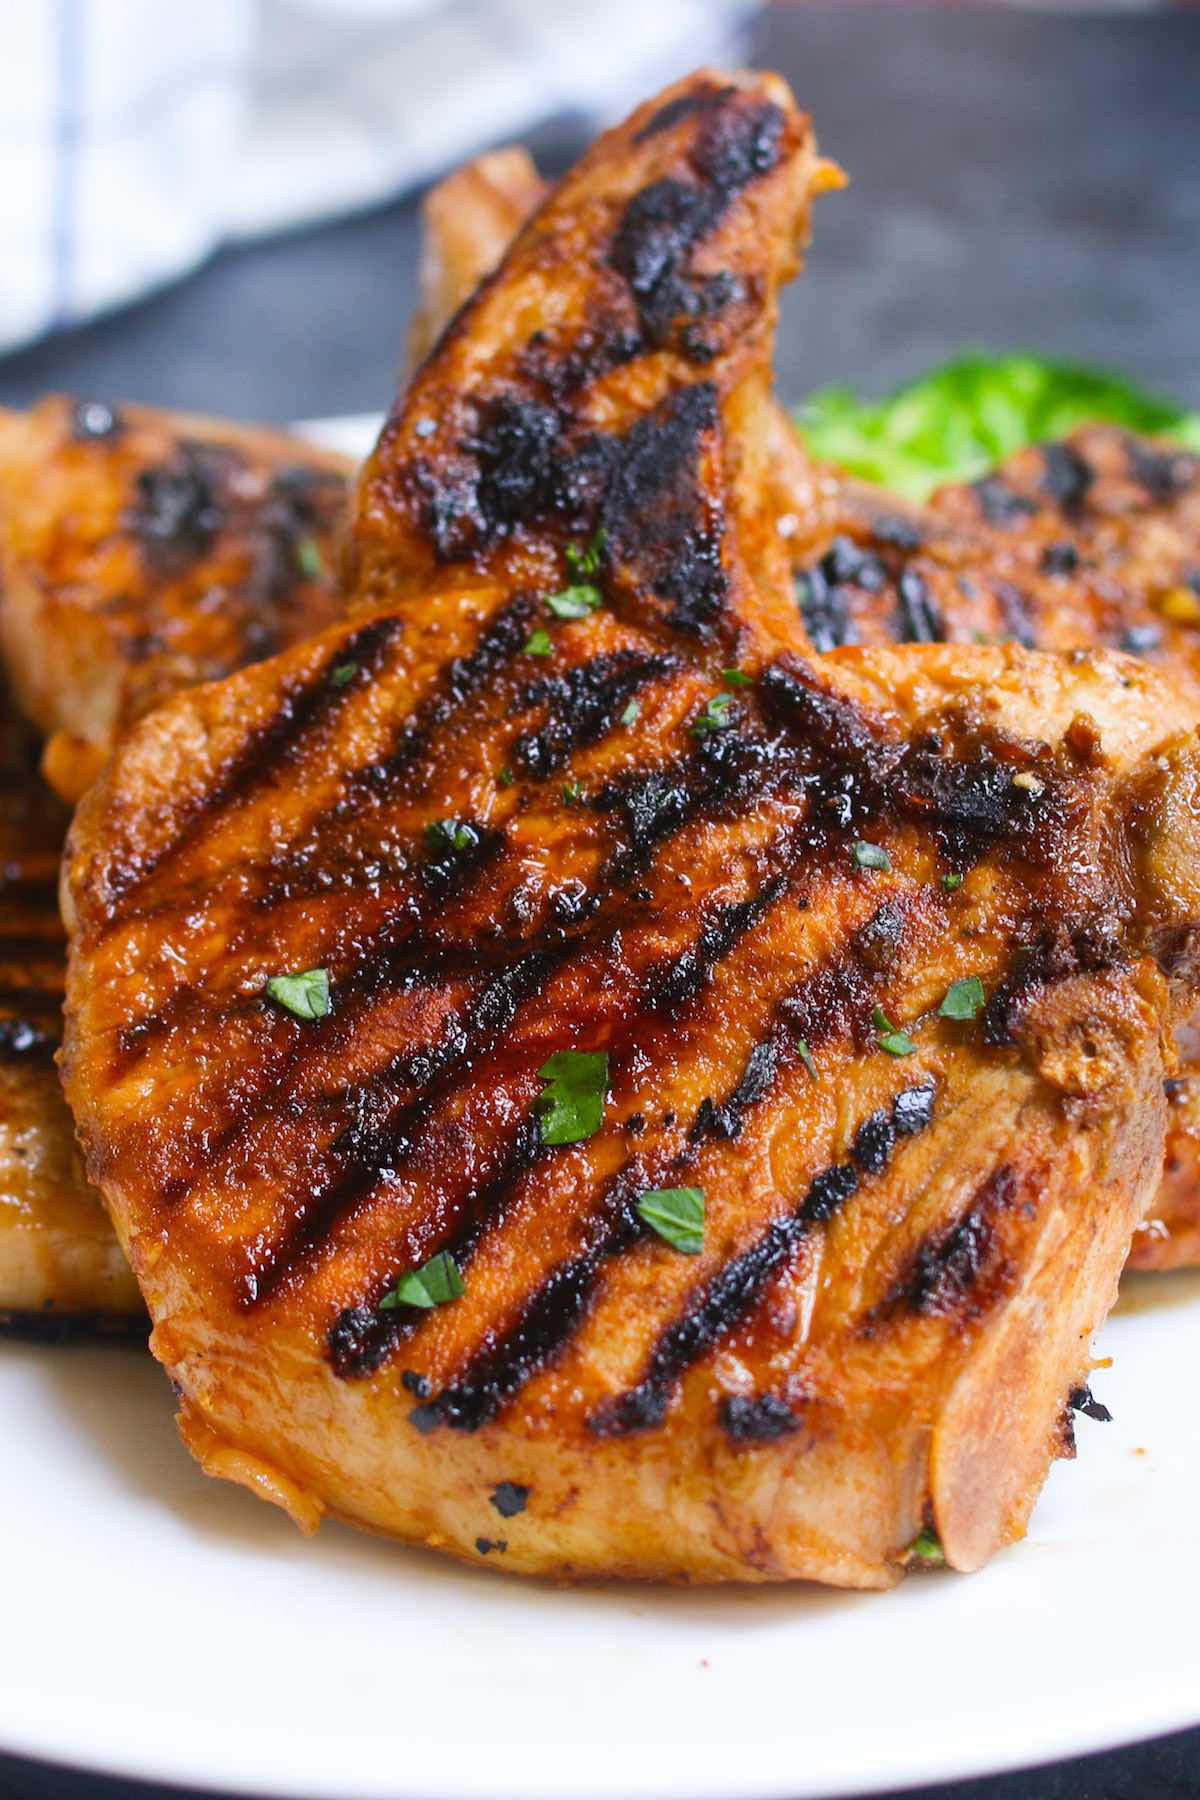 The Best Ever Pork Chop Marinade produces tender and flavorful pork chops every time! It’s an easy pork marinade recipe made with soy sauce, brown sugar, vinegar, garlic, olive oil, and ketchup. You can use the marinated pork chops for grilling, pan frying, or baking. 